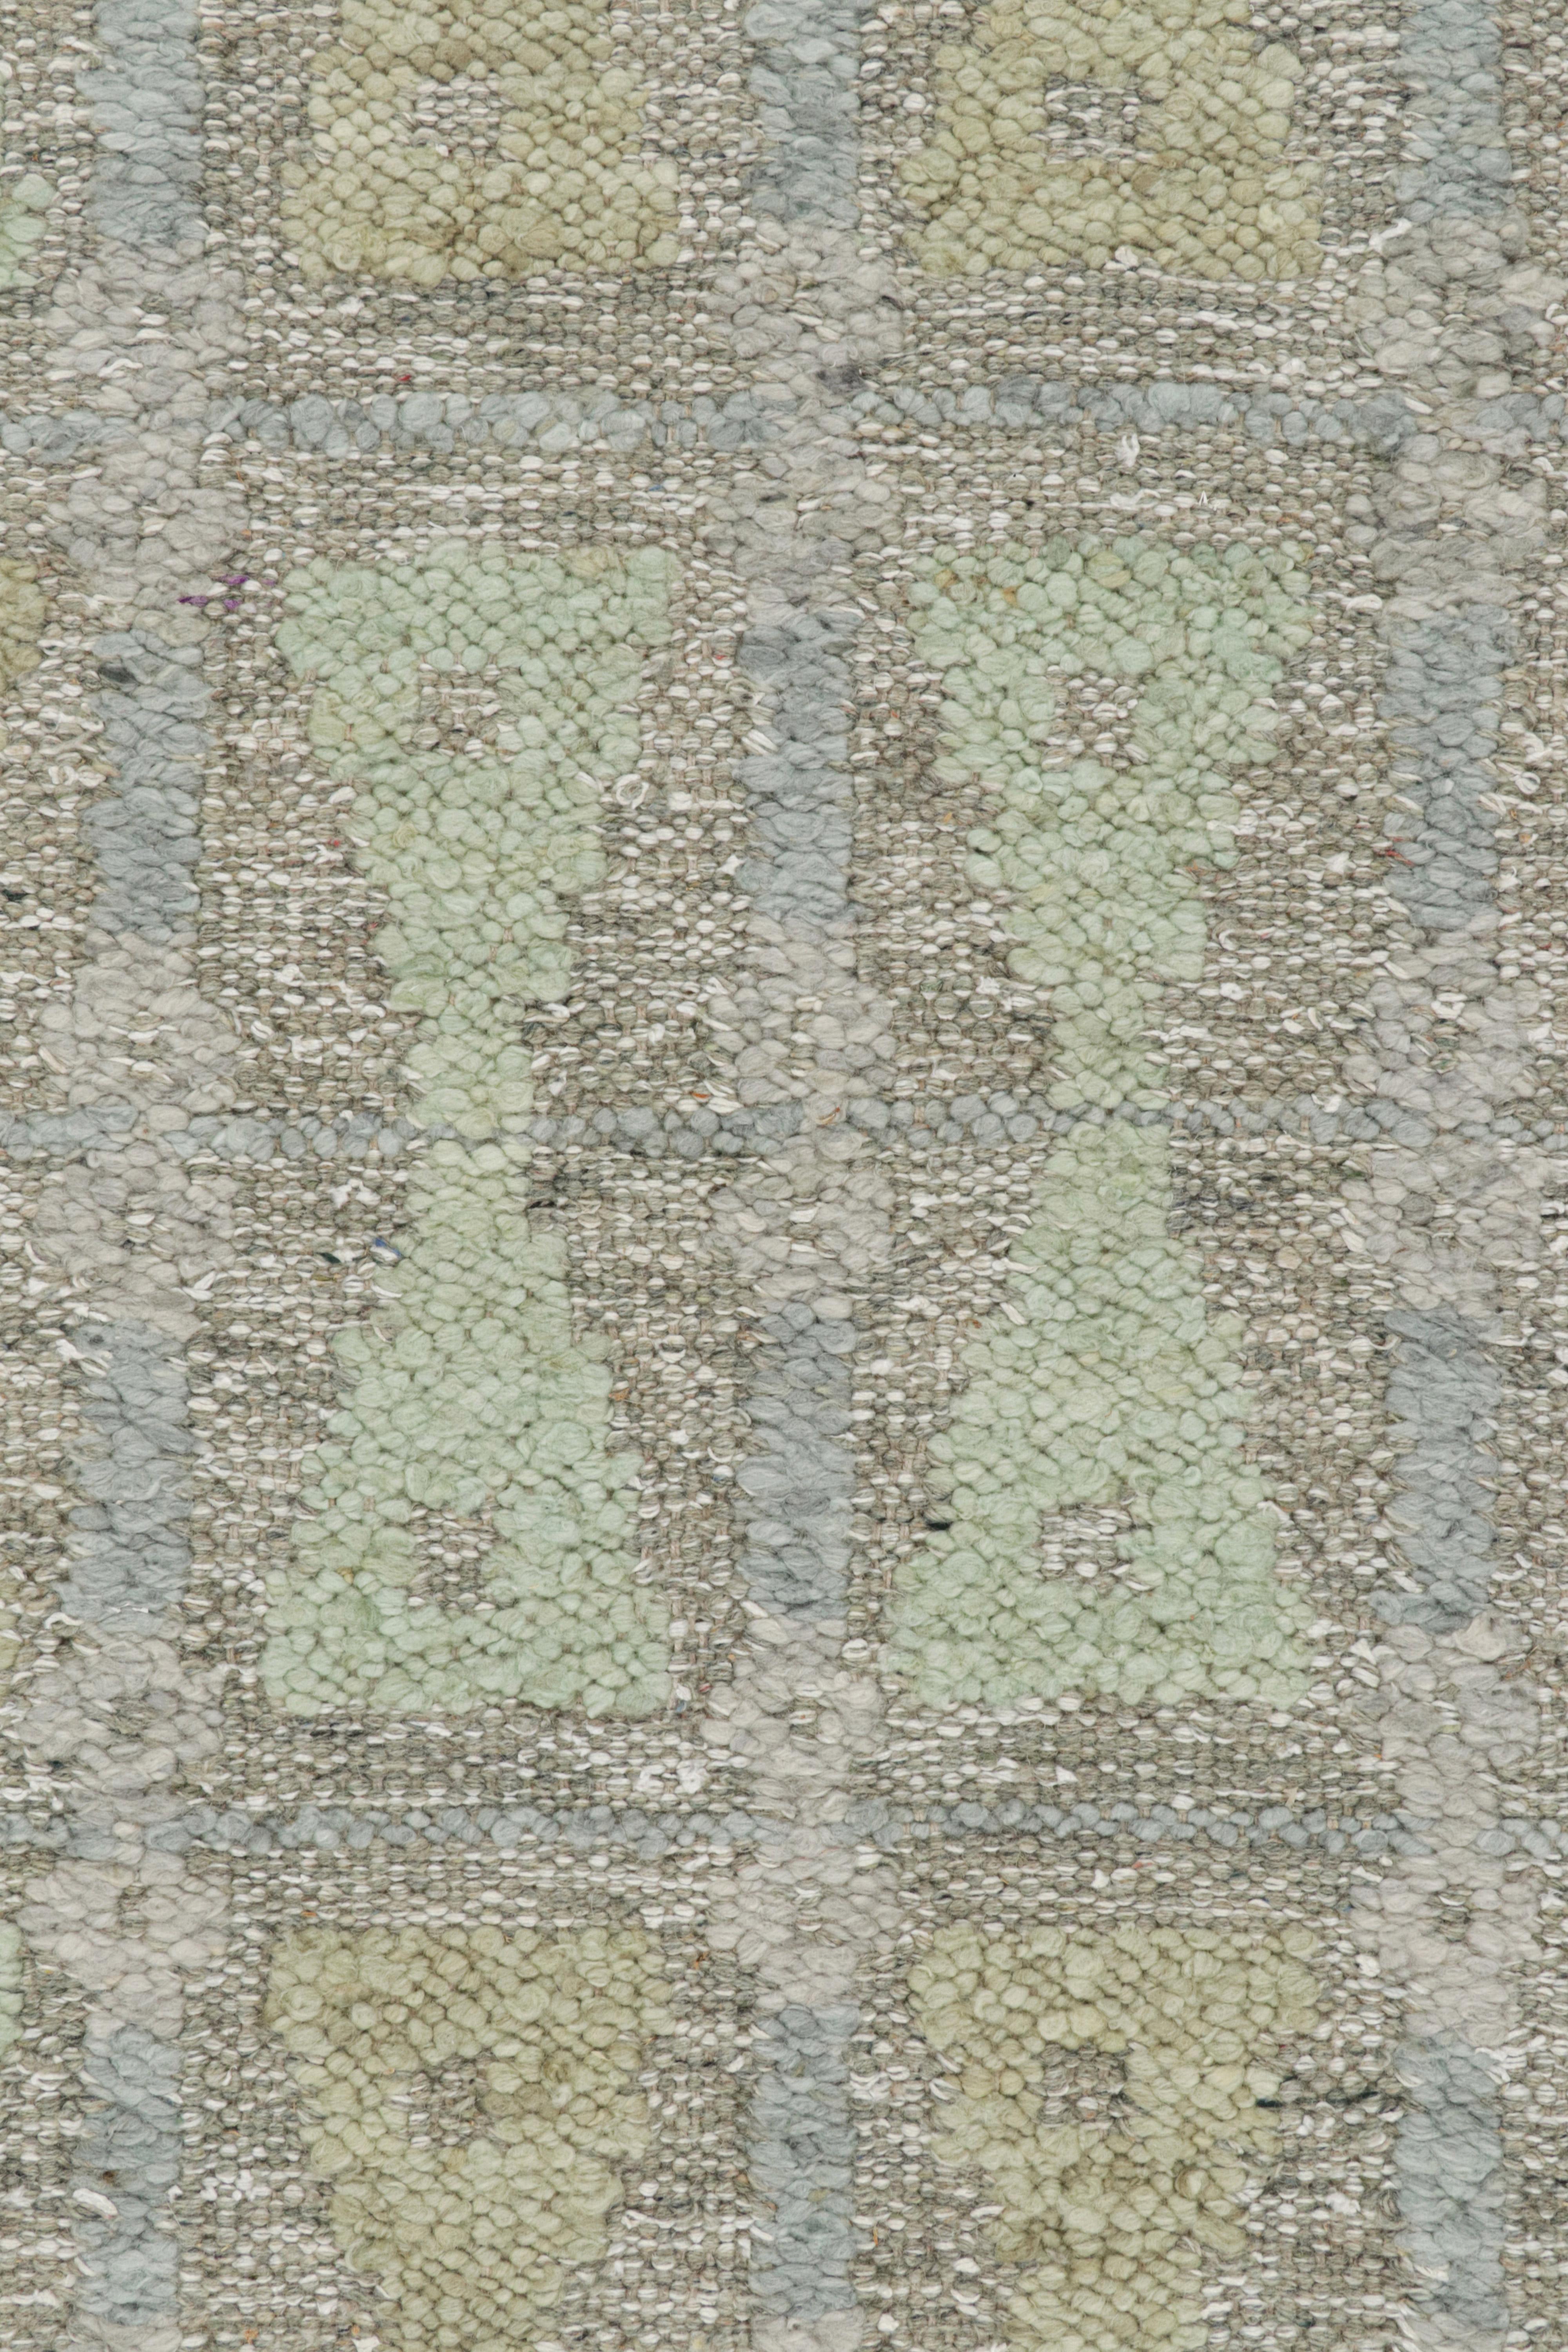 Modern Rug & Kilim’s Scandinavian Style Rug with Hourglass Patterns in Tones of Green For Sale